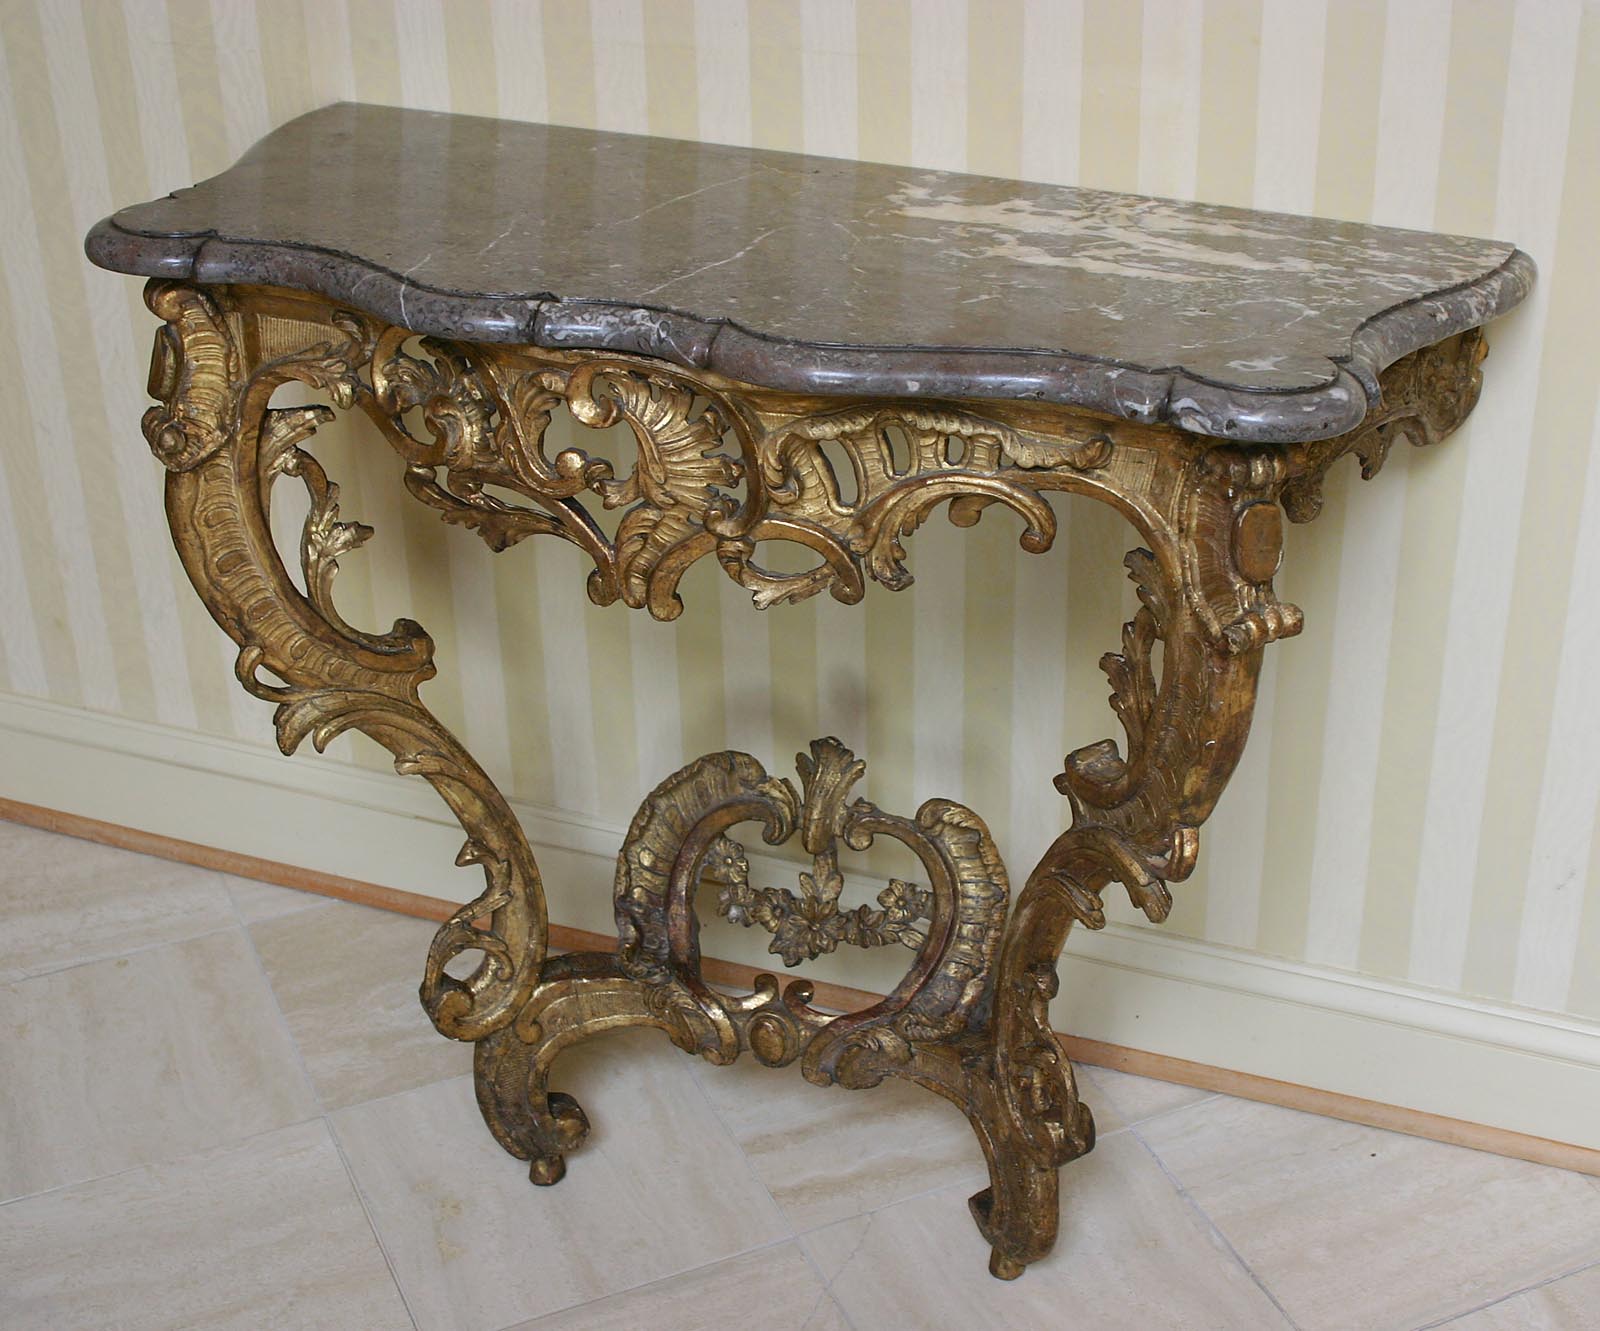 French, 18th century, Louis XV period console table